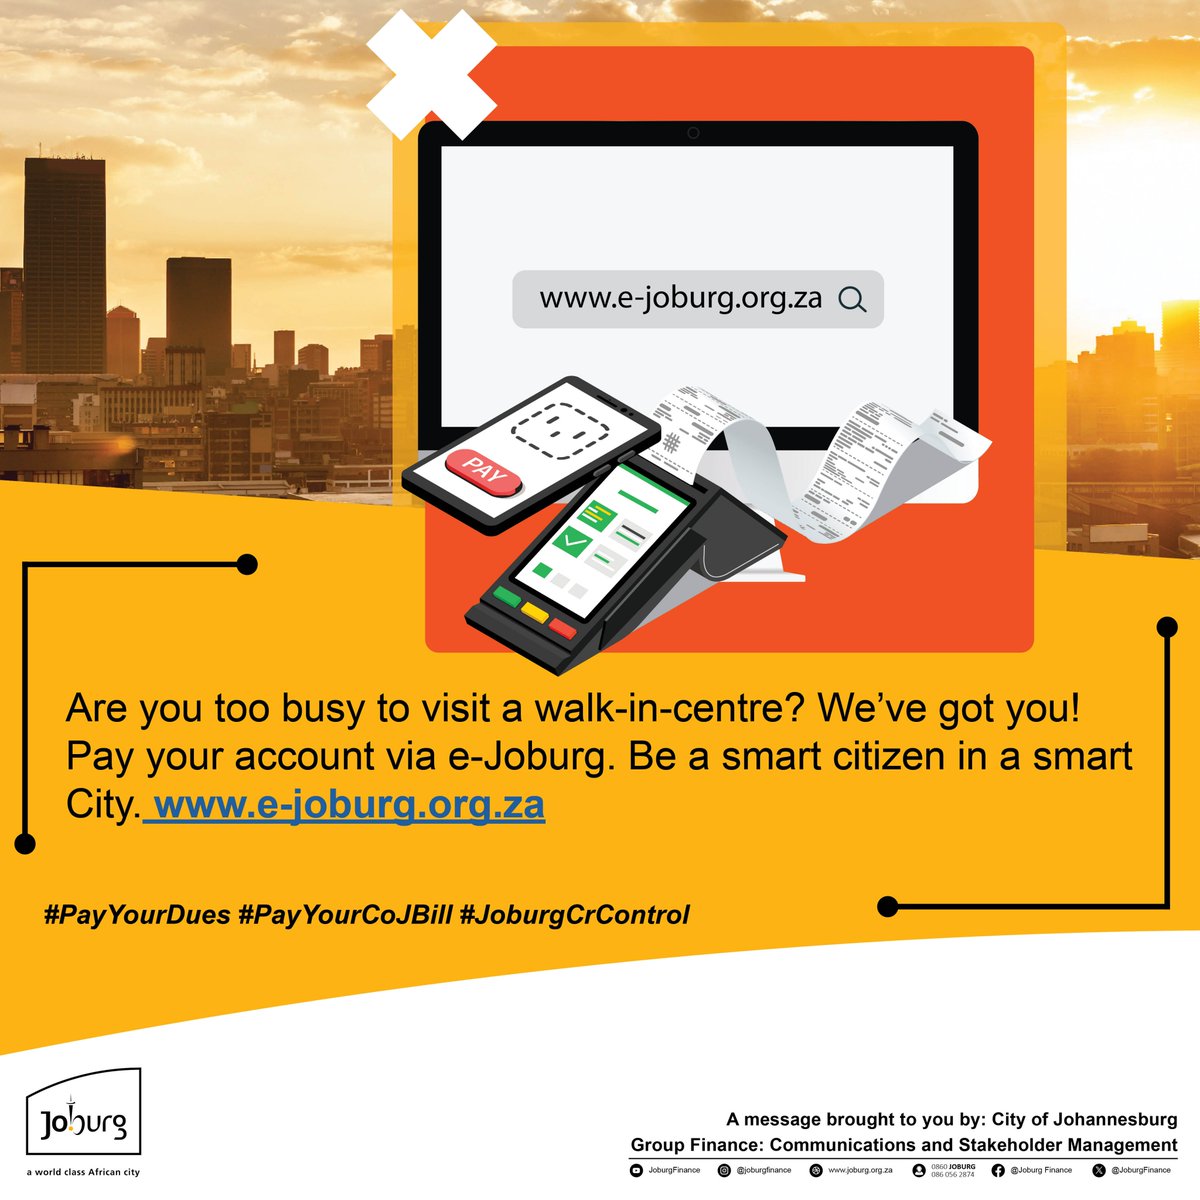 Are you too busy to visit a walk-in-centre? We've got you! Pay your account via e-Joburg. Be a smart citizen in a smart City. 
Register on: e-joburg.org.za 
@CityofJoburgZA @JHBWater @CityPowerJhb
#PayYourDues #PayYourCOJBill #JoburgCrControl